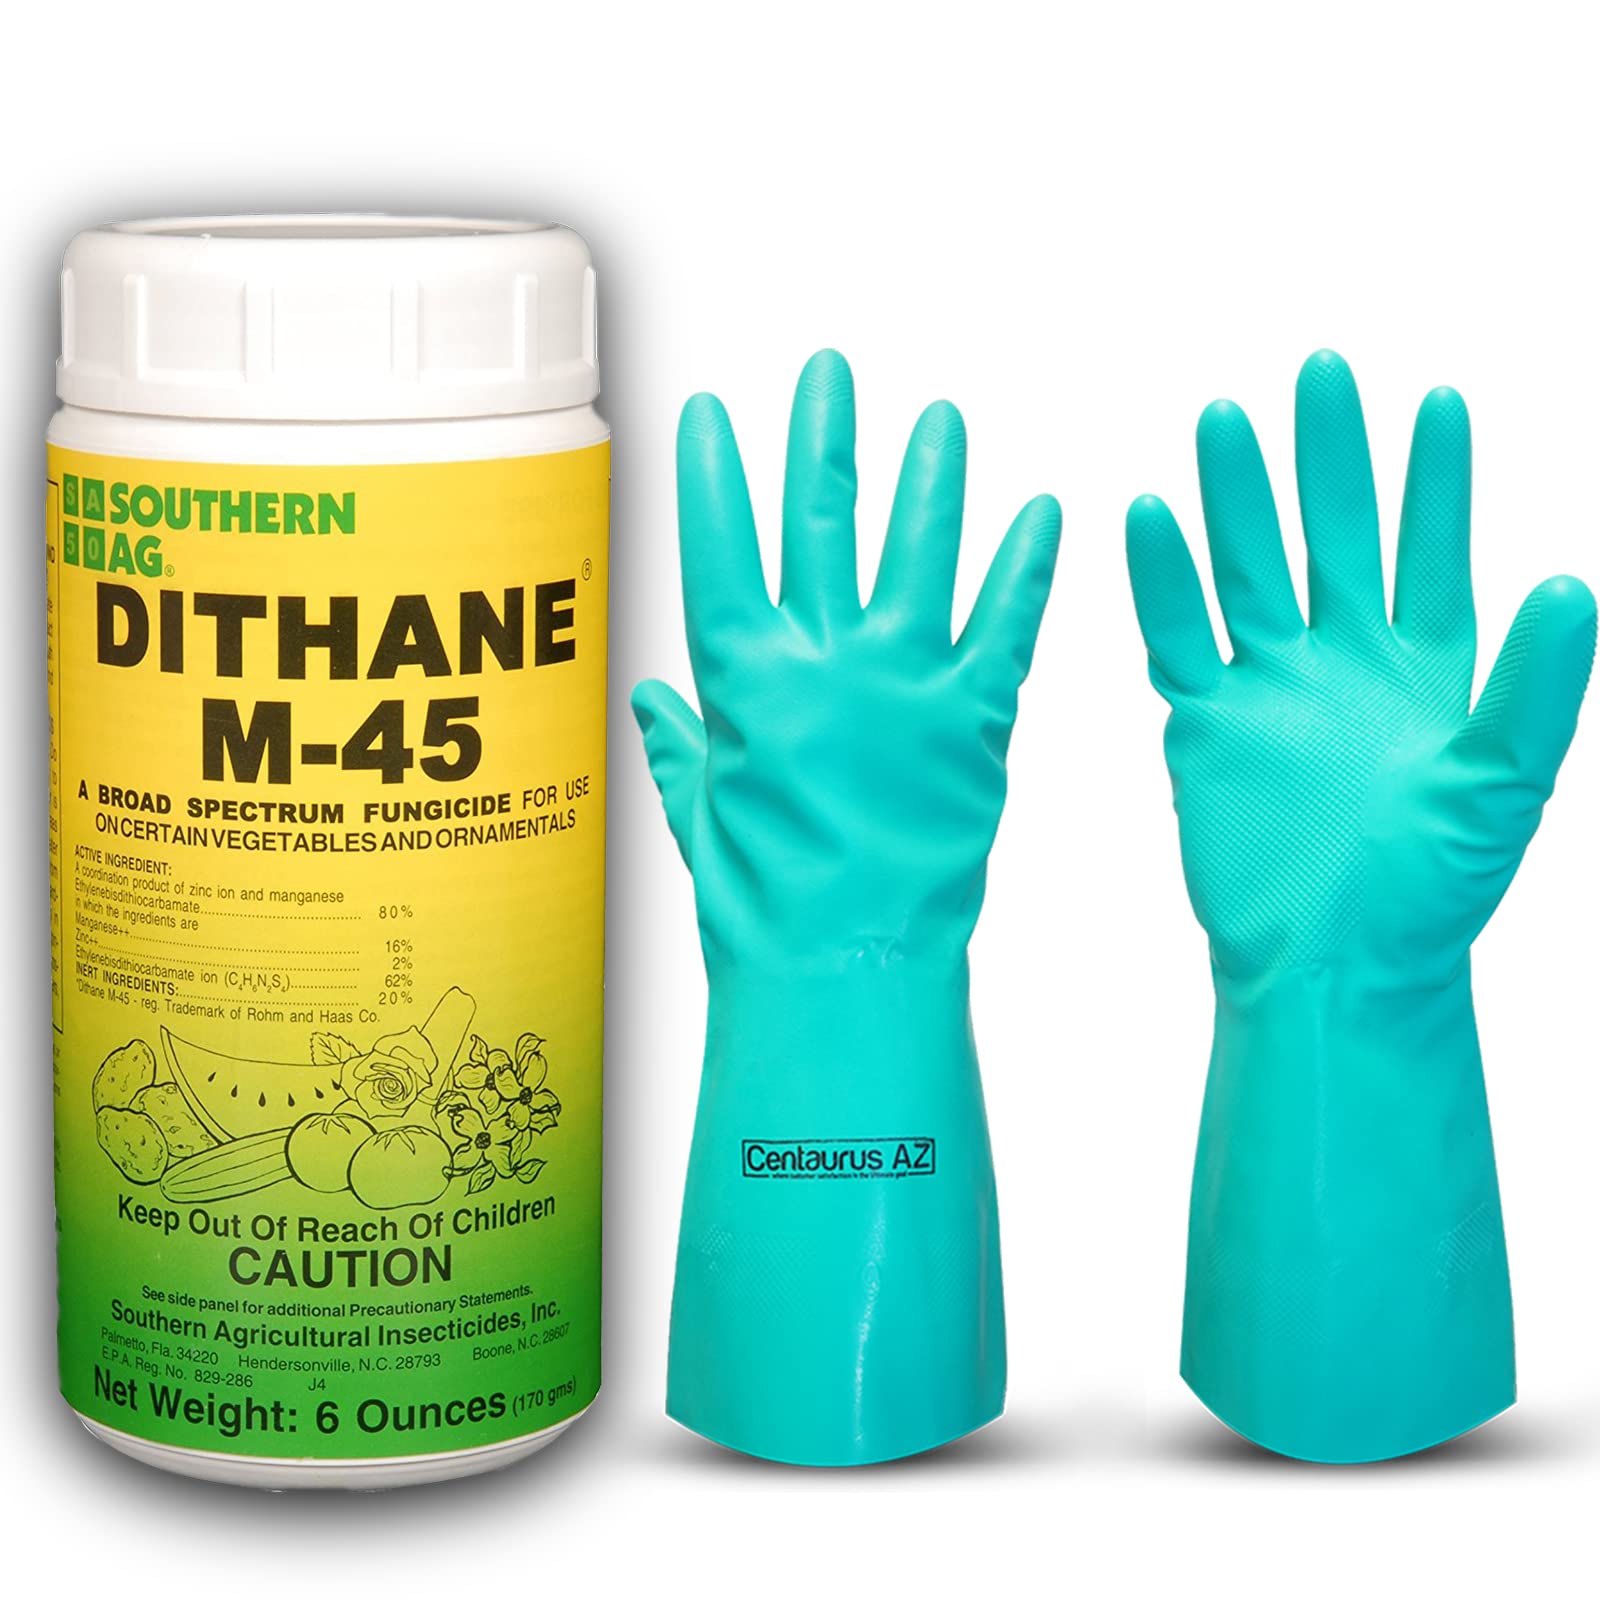 Southern Ag Dithane M-45 Fungicide- Lawn Fungus Control - Liquid Copper Fungicide - Copper Fungicide Powder - Leaf Spot Fungicide - Available with Premium Quality Centaurus AZ Gloves- 6oz.